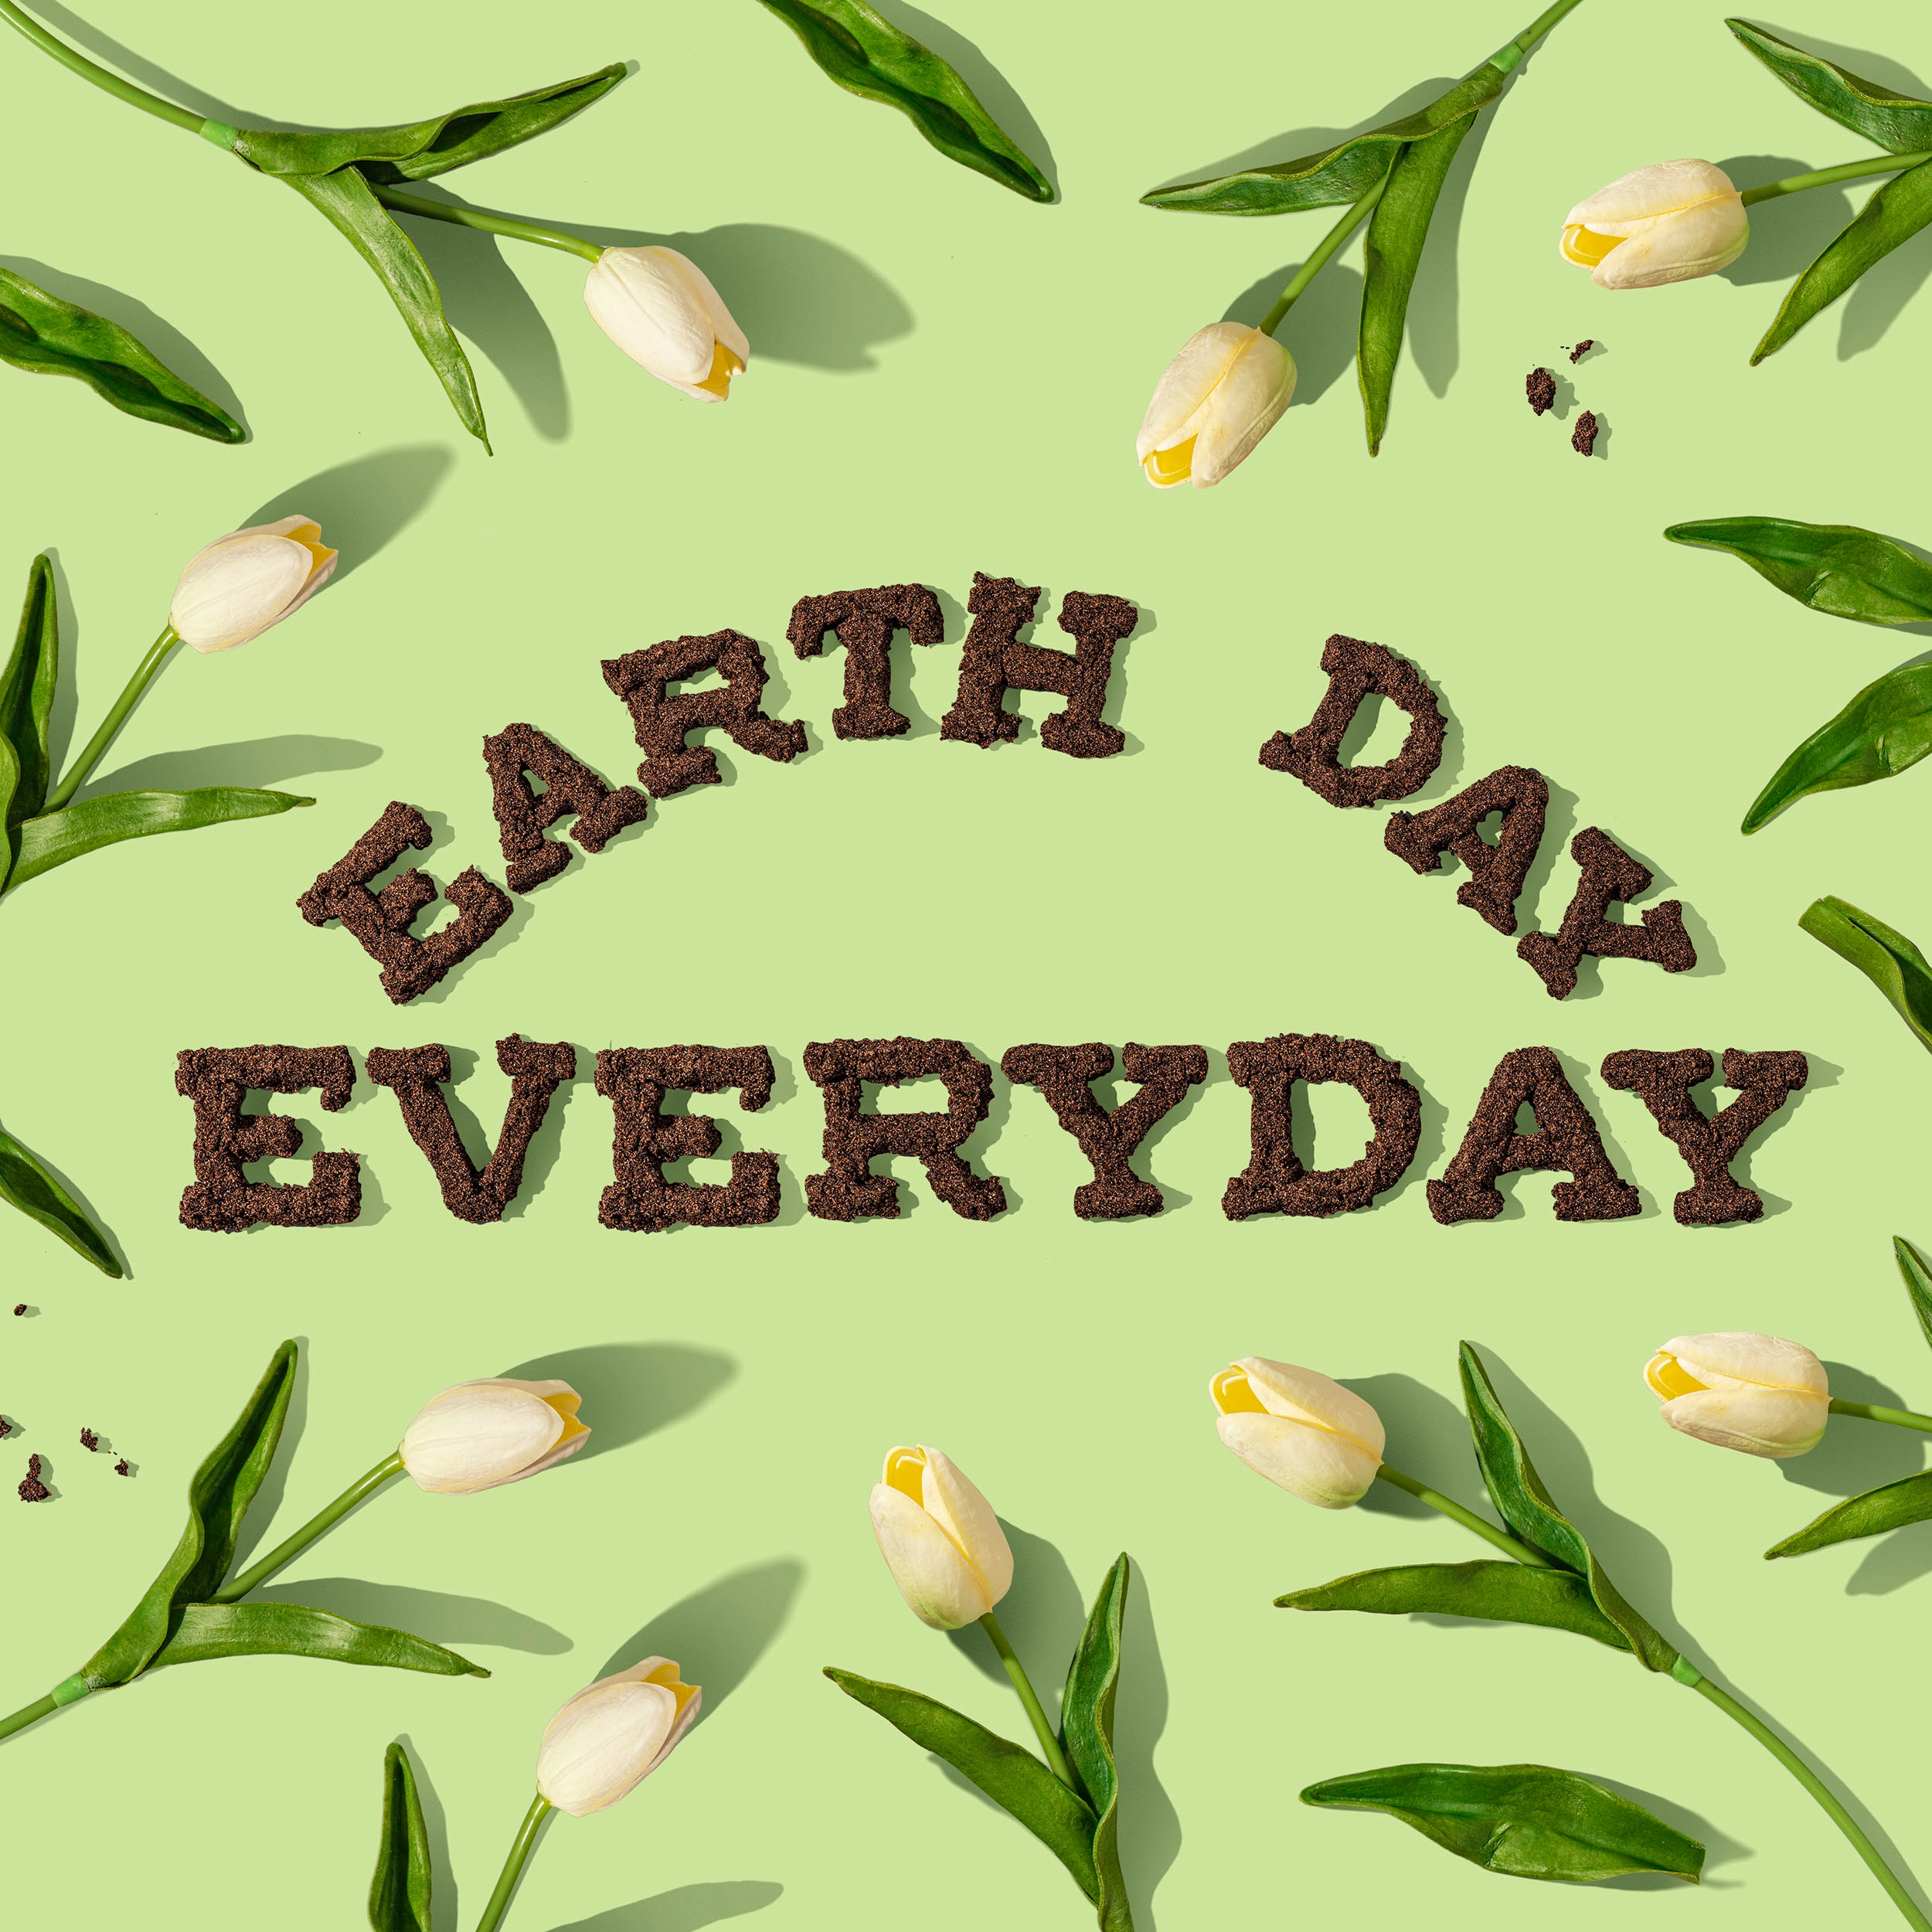 On a light green background, yellow flowers on their stems surround the words "Earth Day Everyday" in brown.